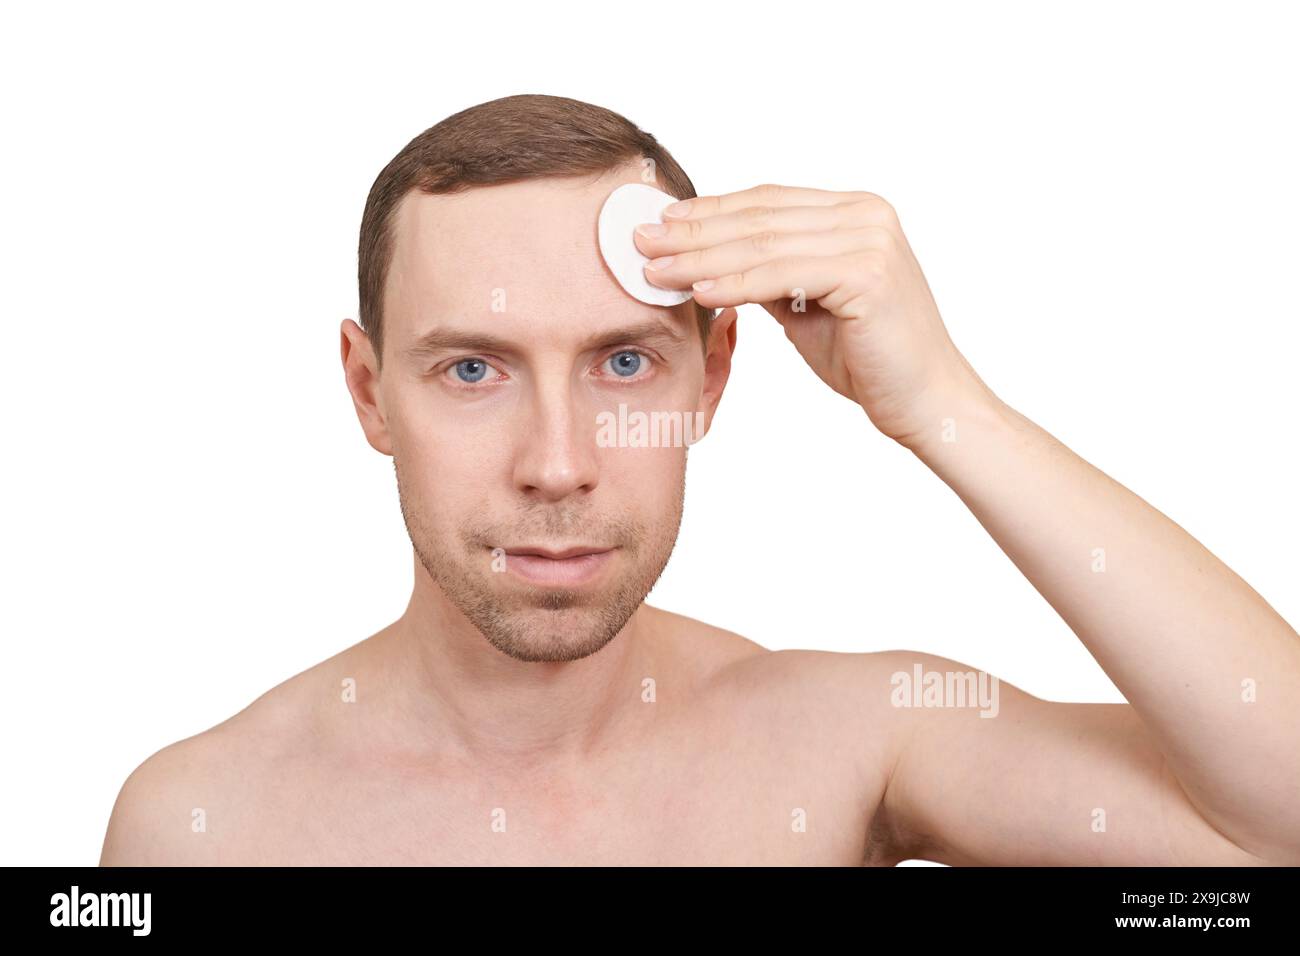 Man doing home skin care routine. Cotton pad near male forehead. Dermatology treatment. Cream facial apply. Cosmetology guy portrait. Cleaning lotion. Skincare hygiene. Copyspace. Isolated on white Stock Photo